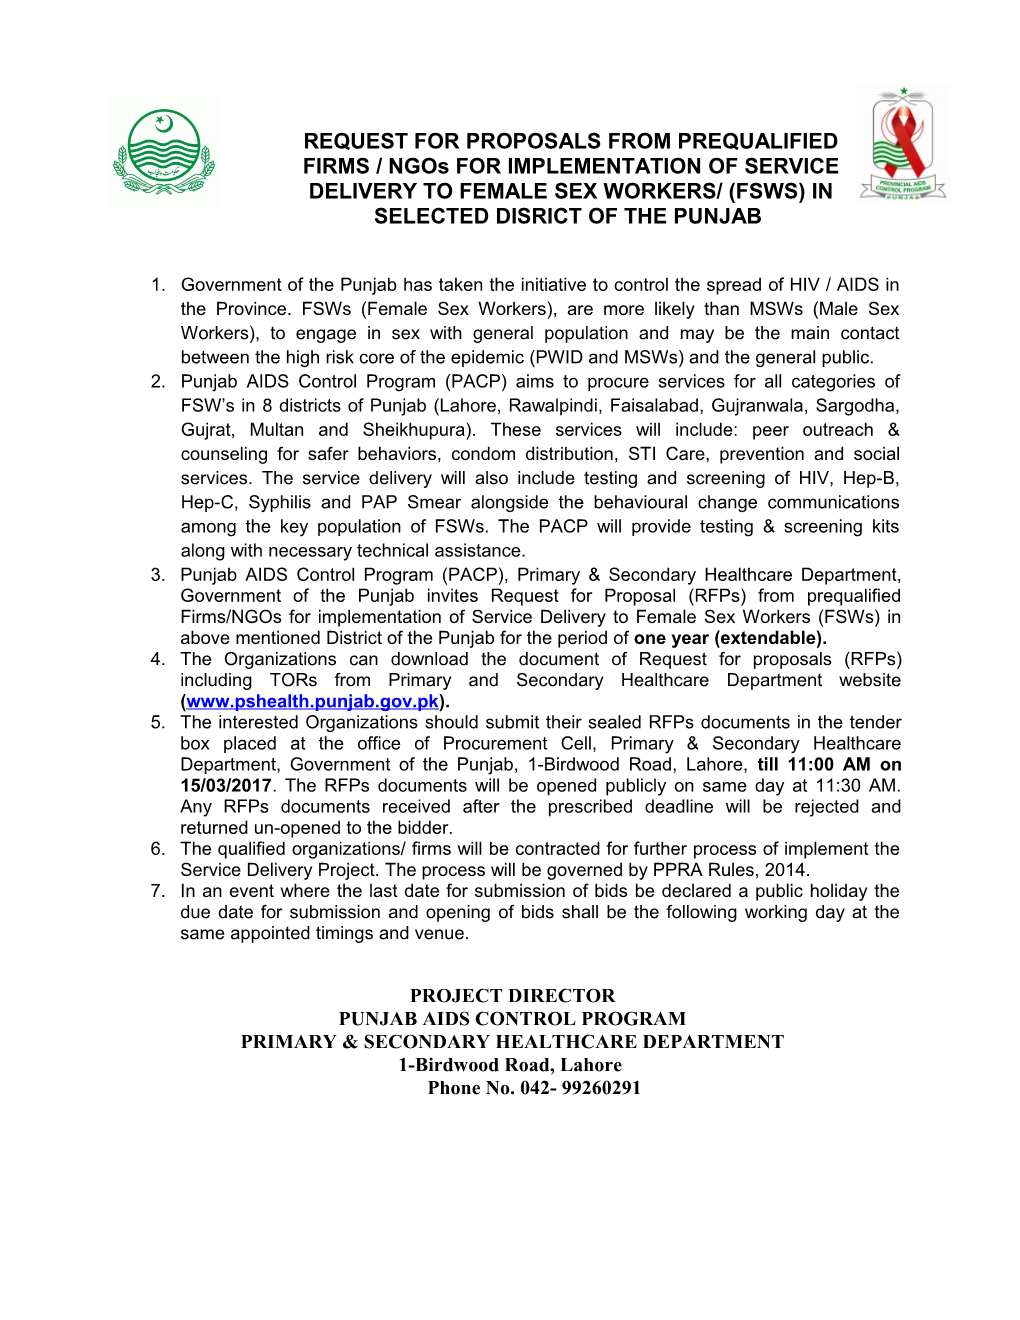 REQUEST for PROPOSALS from PREQUALIFIED FIRMS / Ngos for IMPLEMENTATION of SERVICE DELIVERY